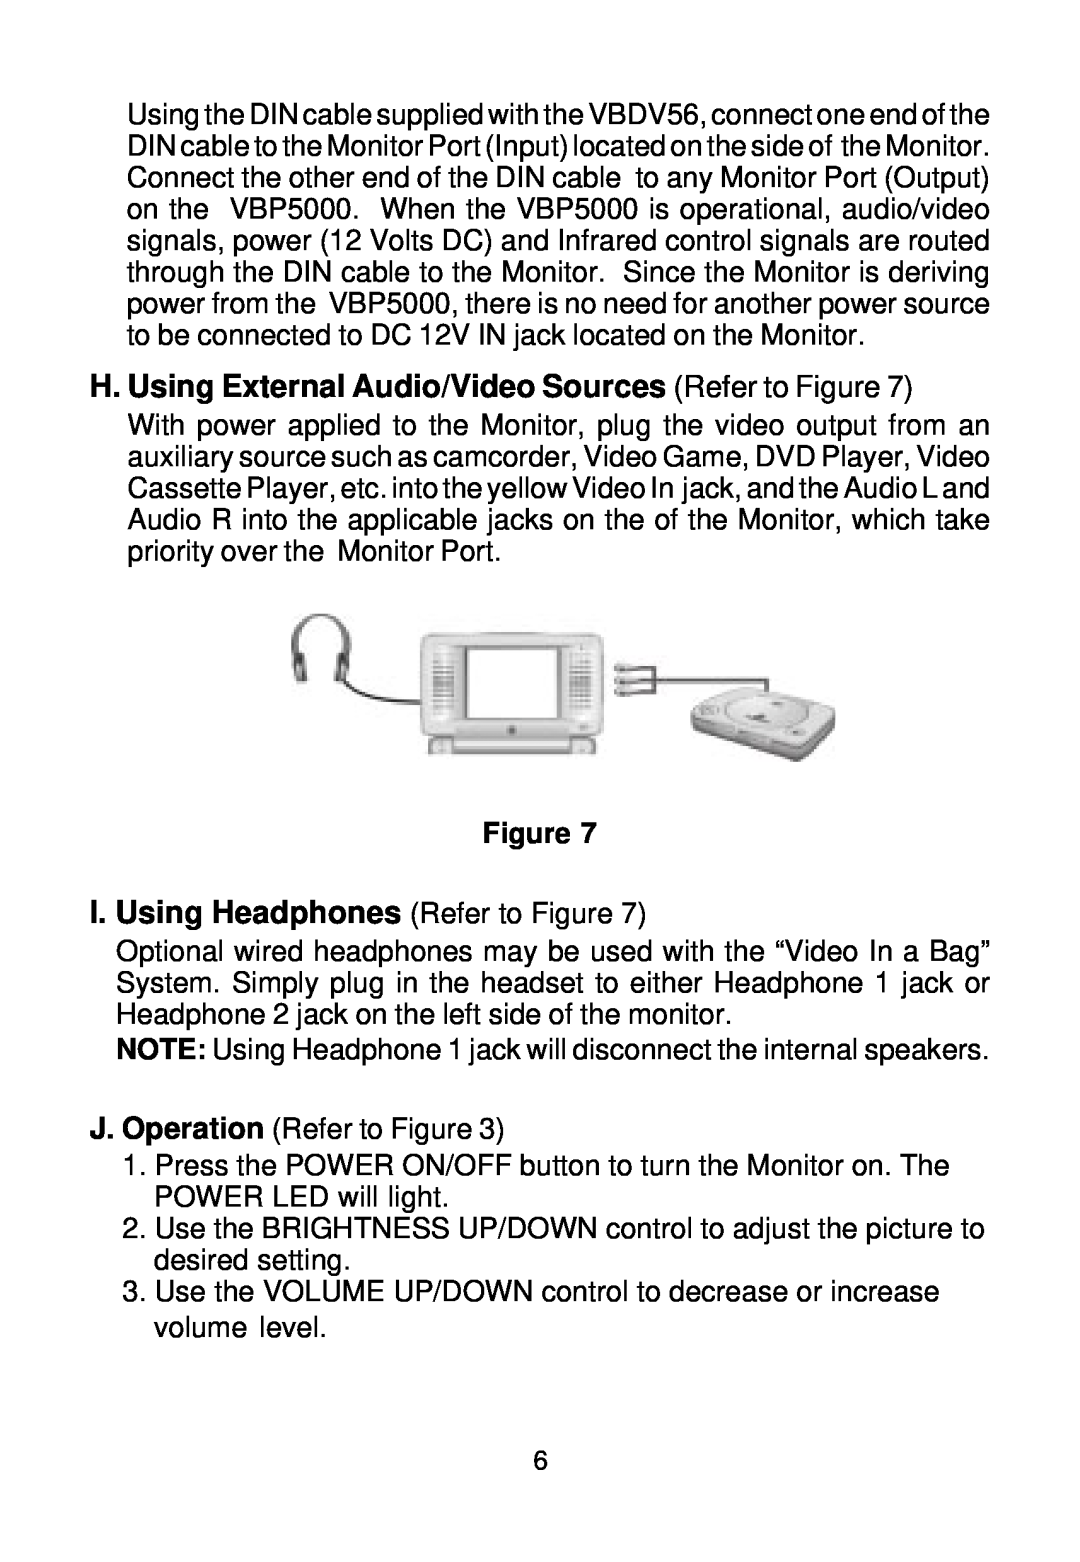 Audiovox VBDV56 owner manual H. Using External Audio/Video Sources Refer to Figure, I. Using Headphones Refer to Figure 